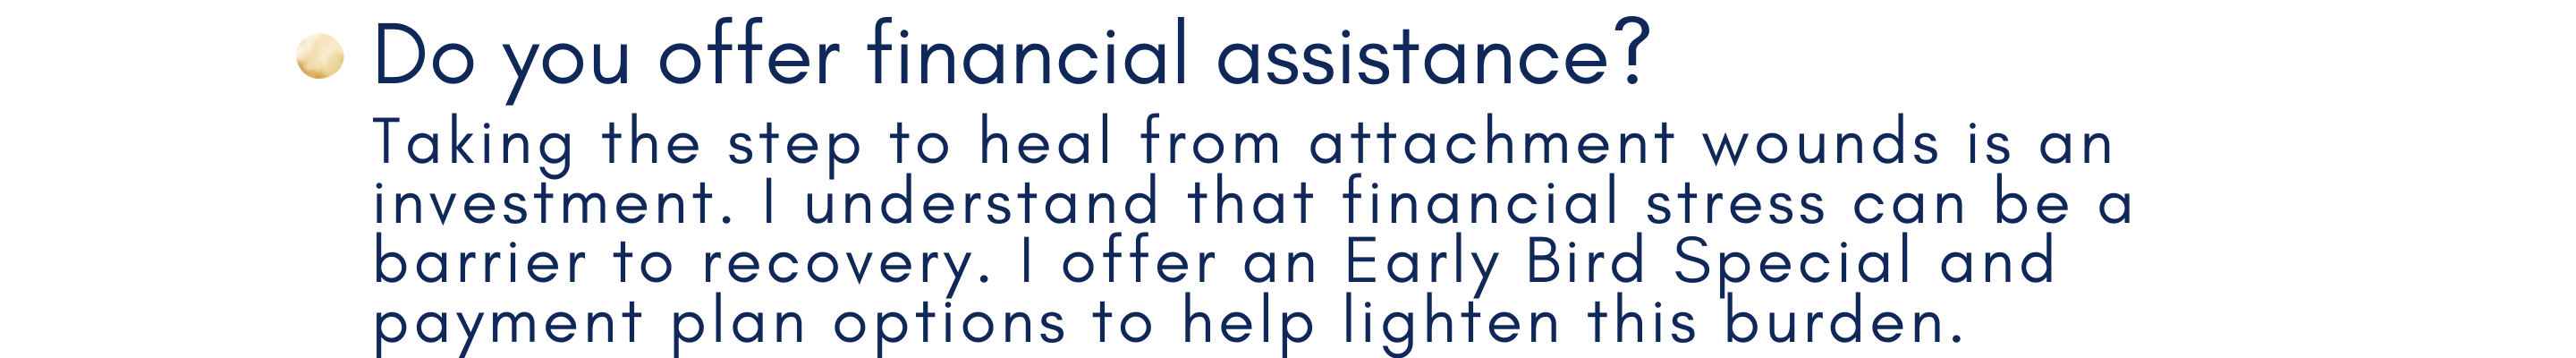 Do you offer financial assistance?